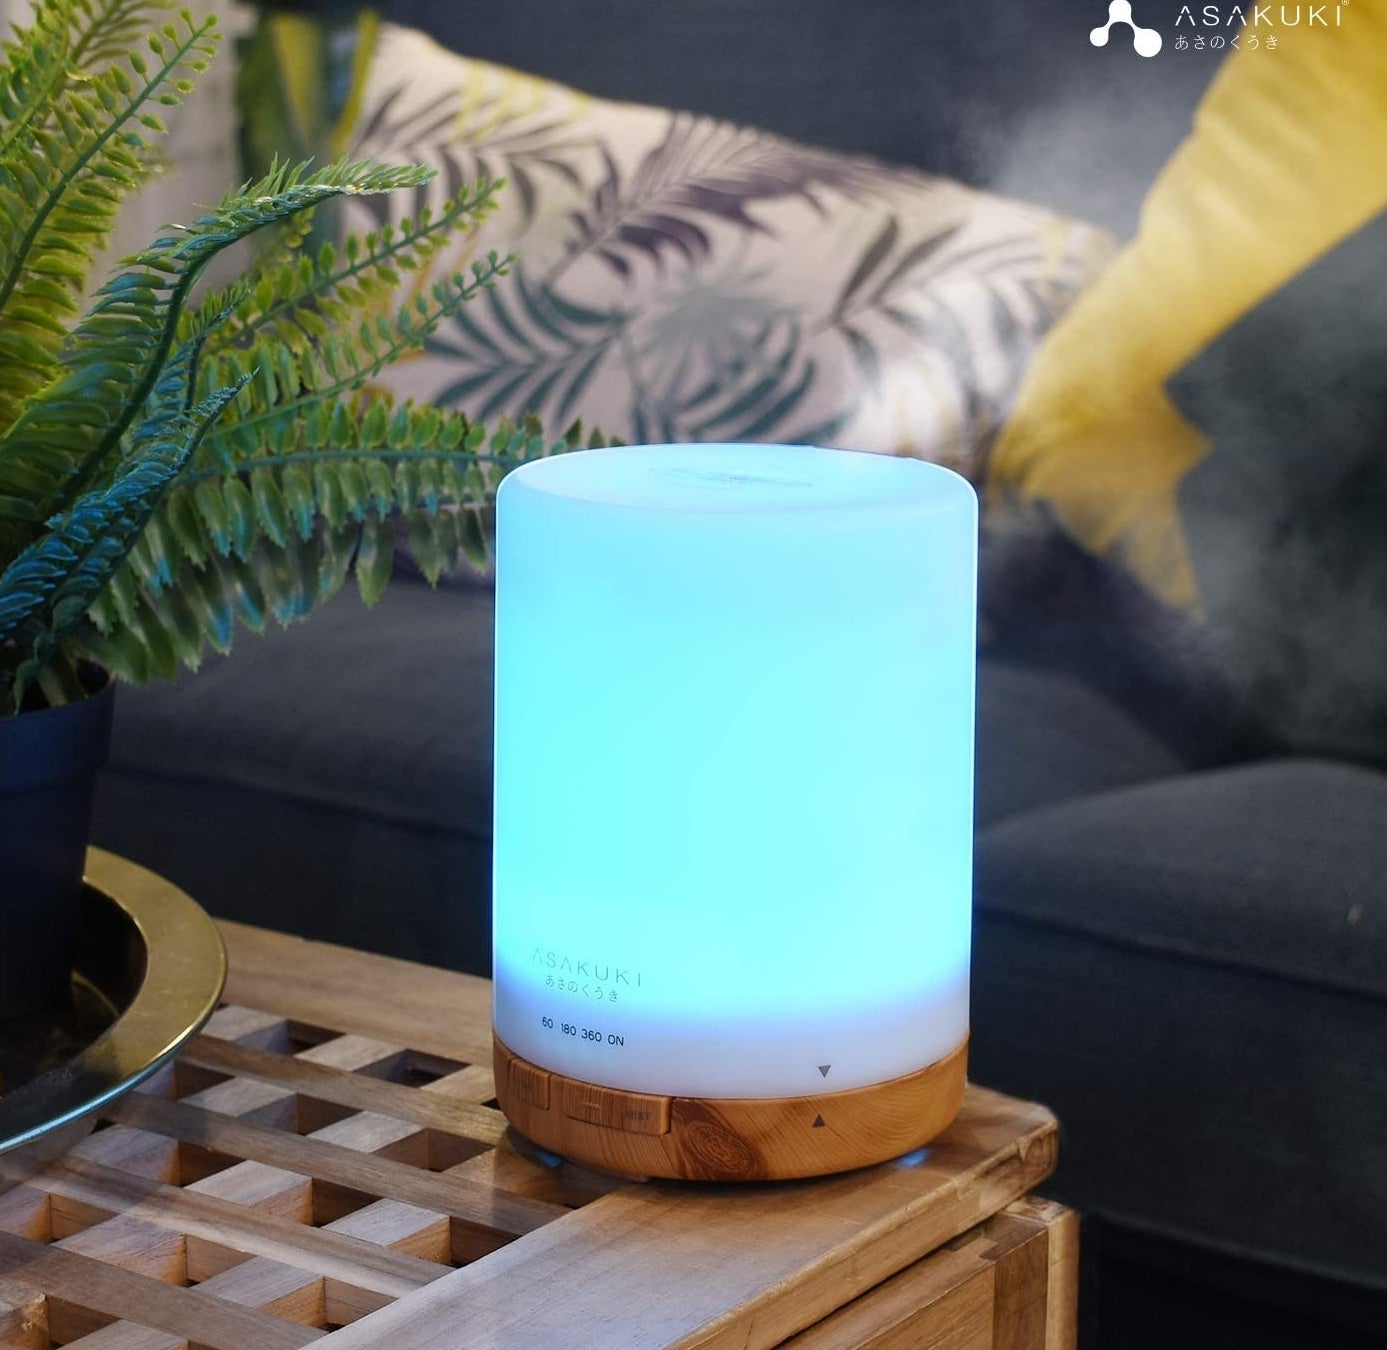 The oil diffuser on a bedside table